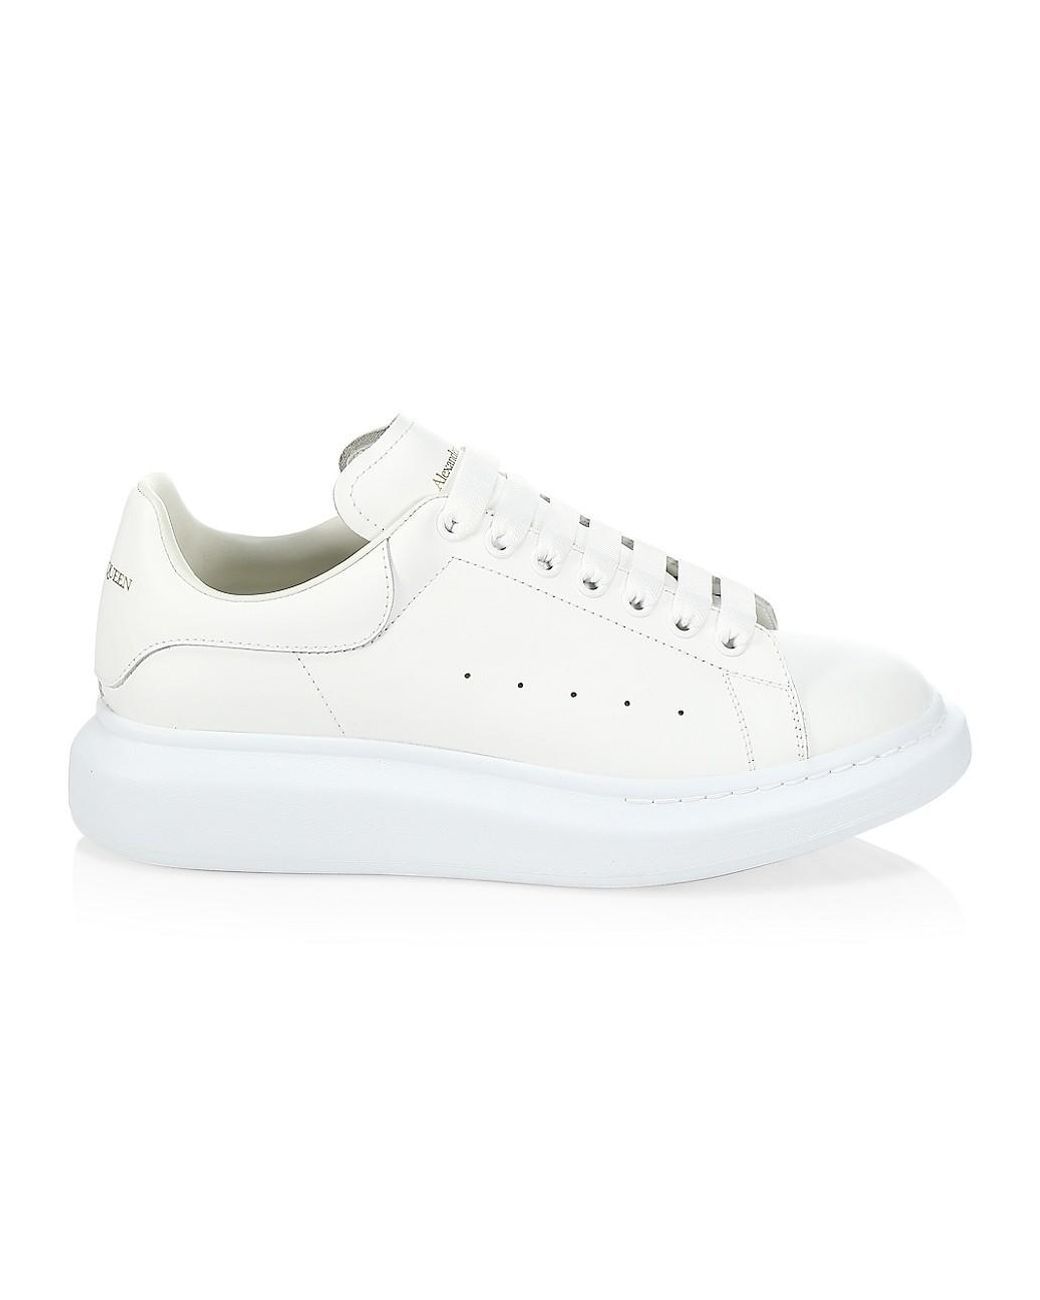 Alexander McQueen Oversized Leather Platform Sneakers in White/ White ...